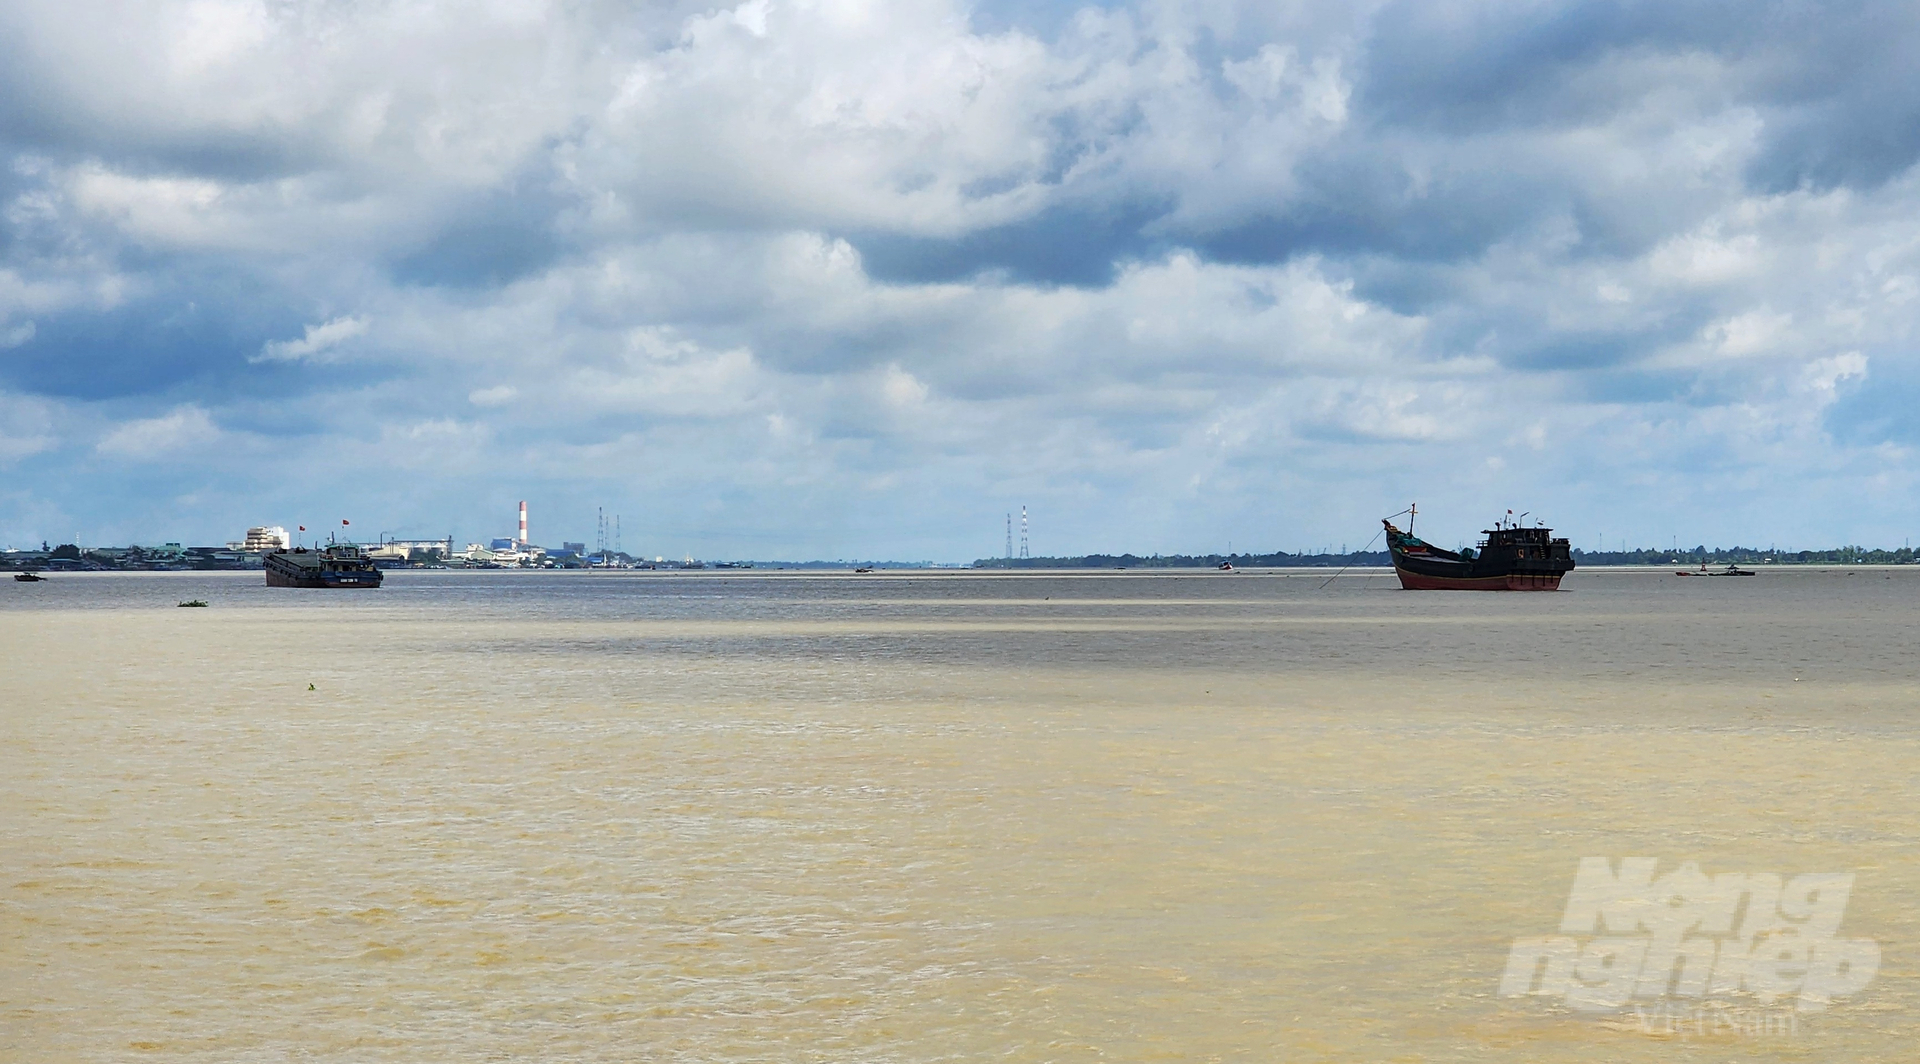 Experts assess that over the past 10 years, major floods in the Mekong Delta have decreased, while low and medium floods have increased. Photo: Kim Anh.